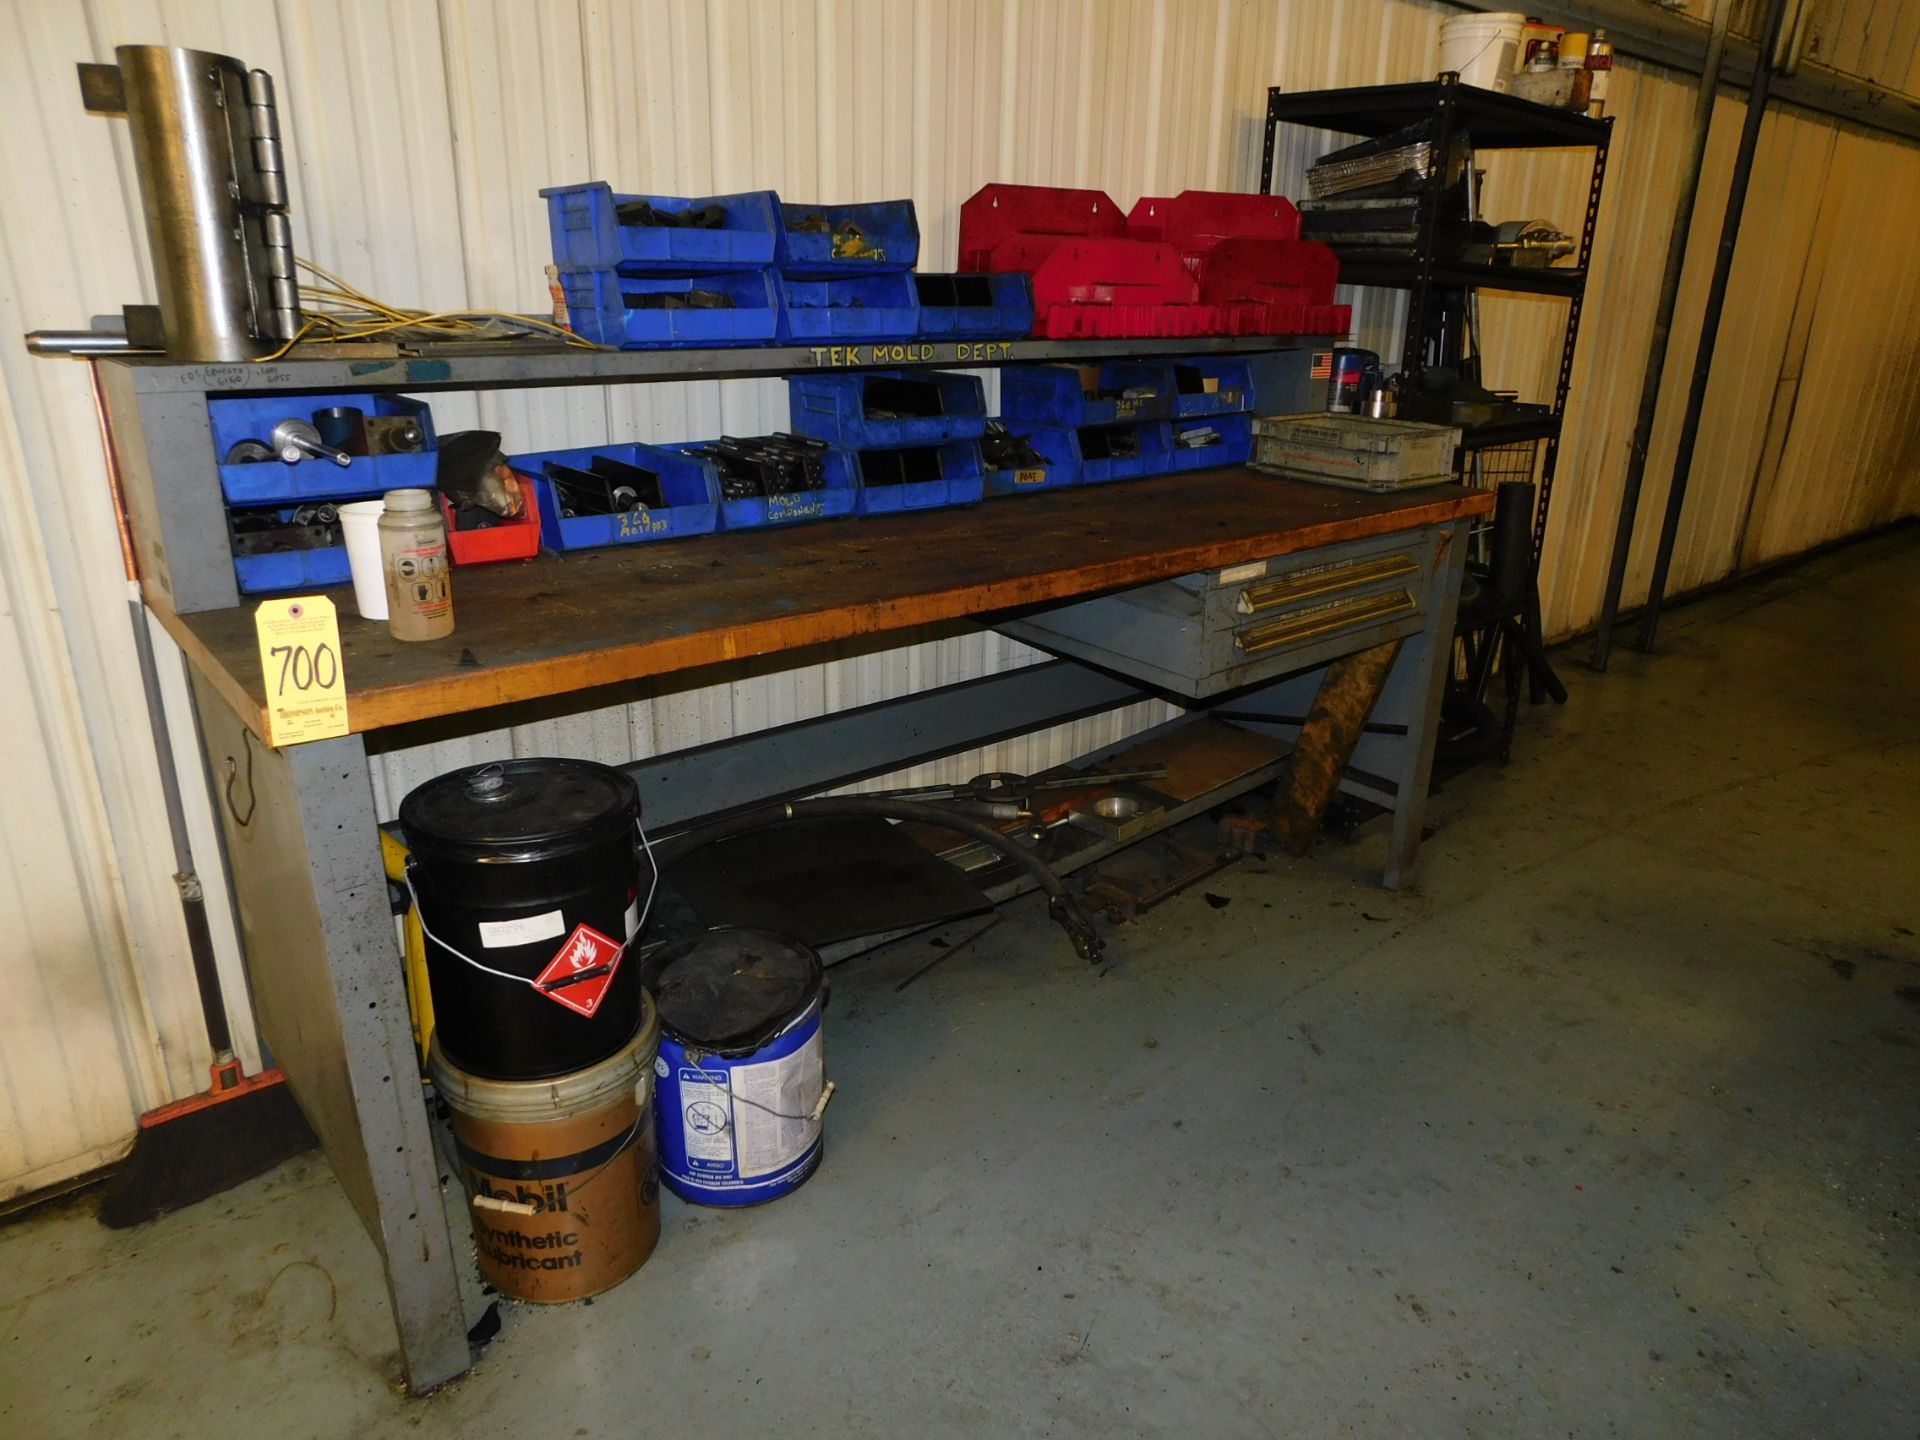 Butcher Block Top Work Bench and Contents, 30" X 96" X 38" High, and Metal Shelving and Contents